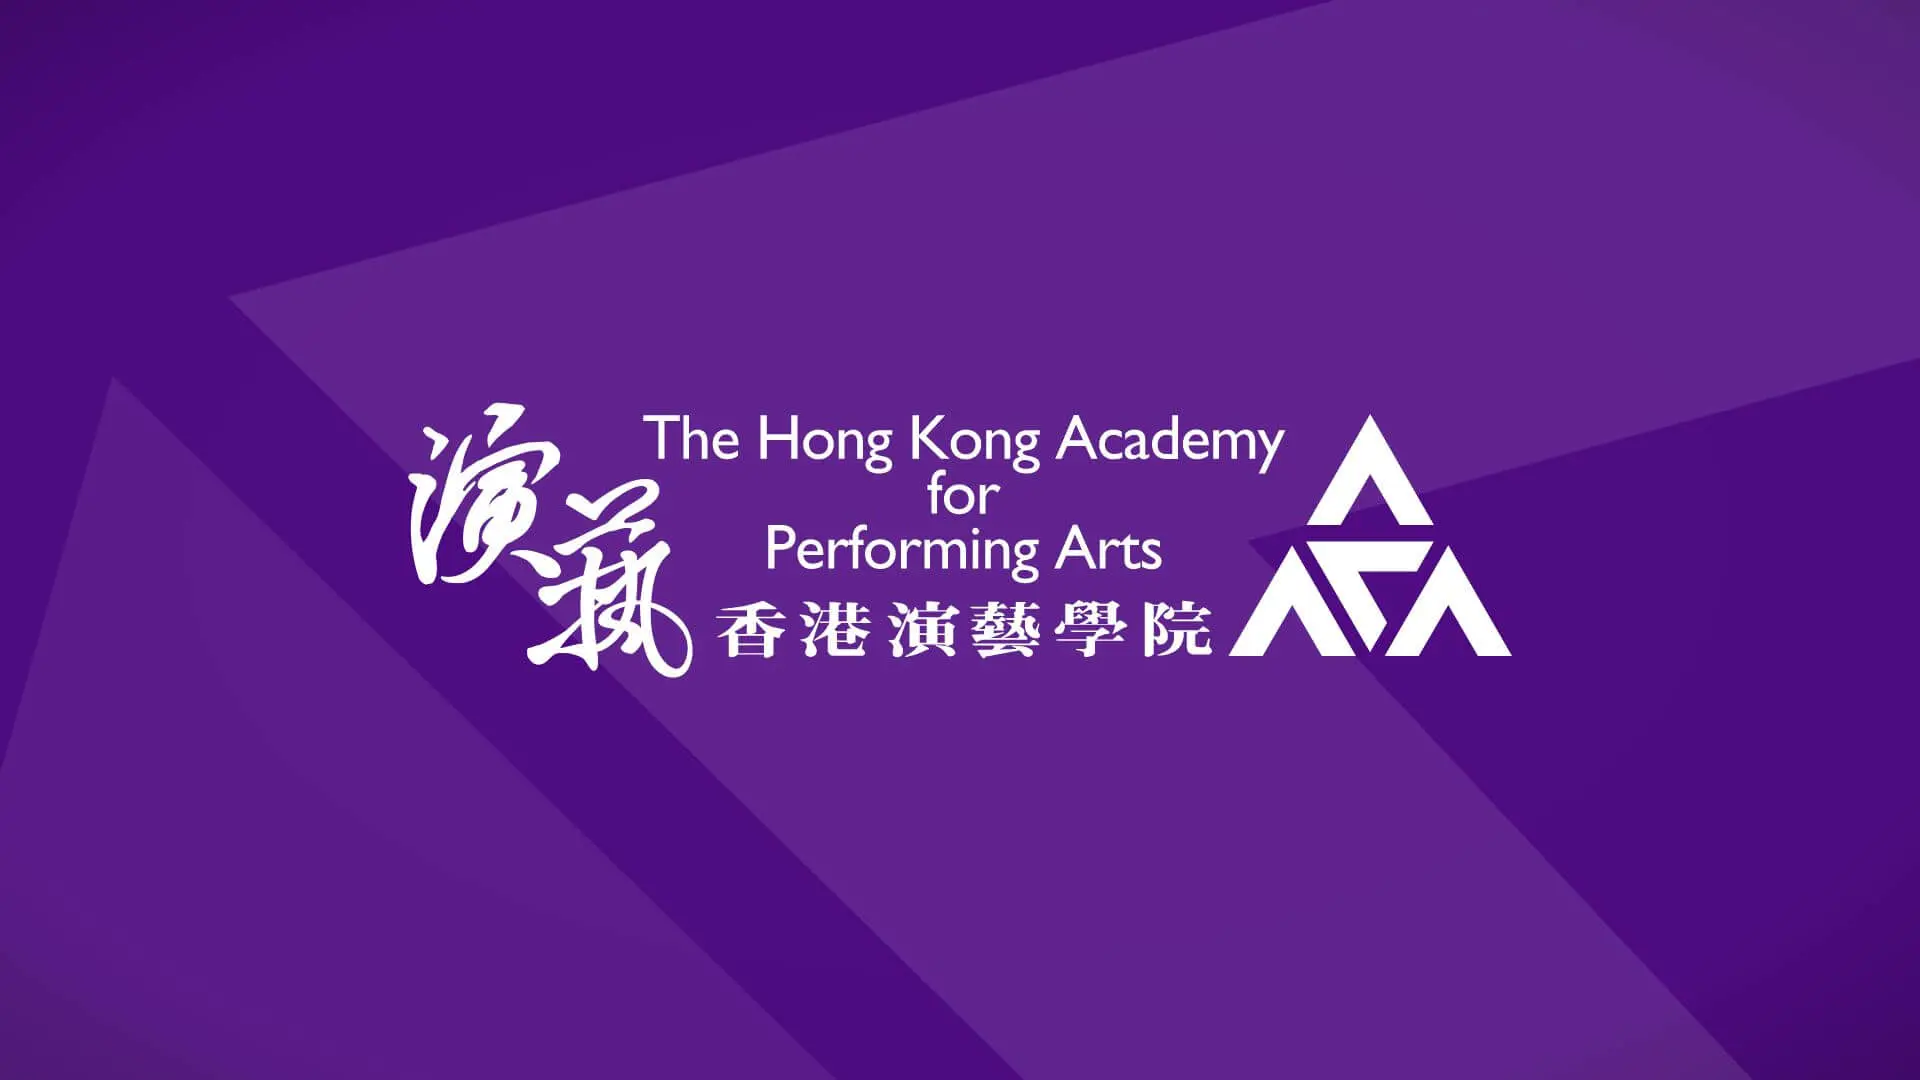 (Cancelled) Academy Postgraduate Music Lecture-Demonstration - Ma Man-ki (Conducting for Western Orchestras)